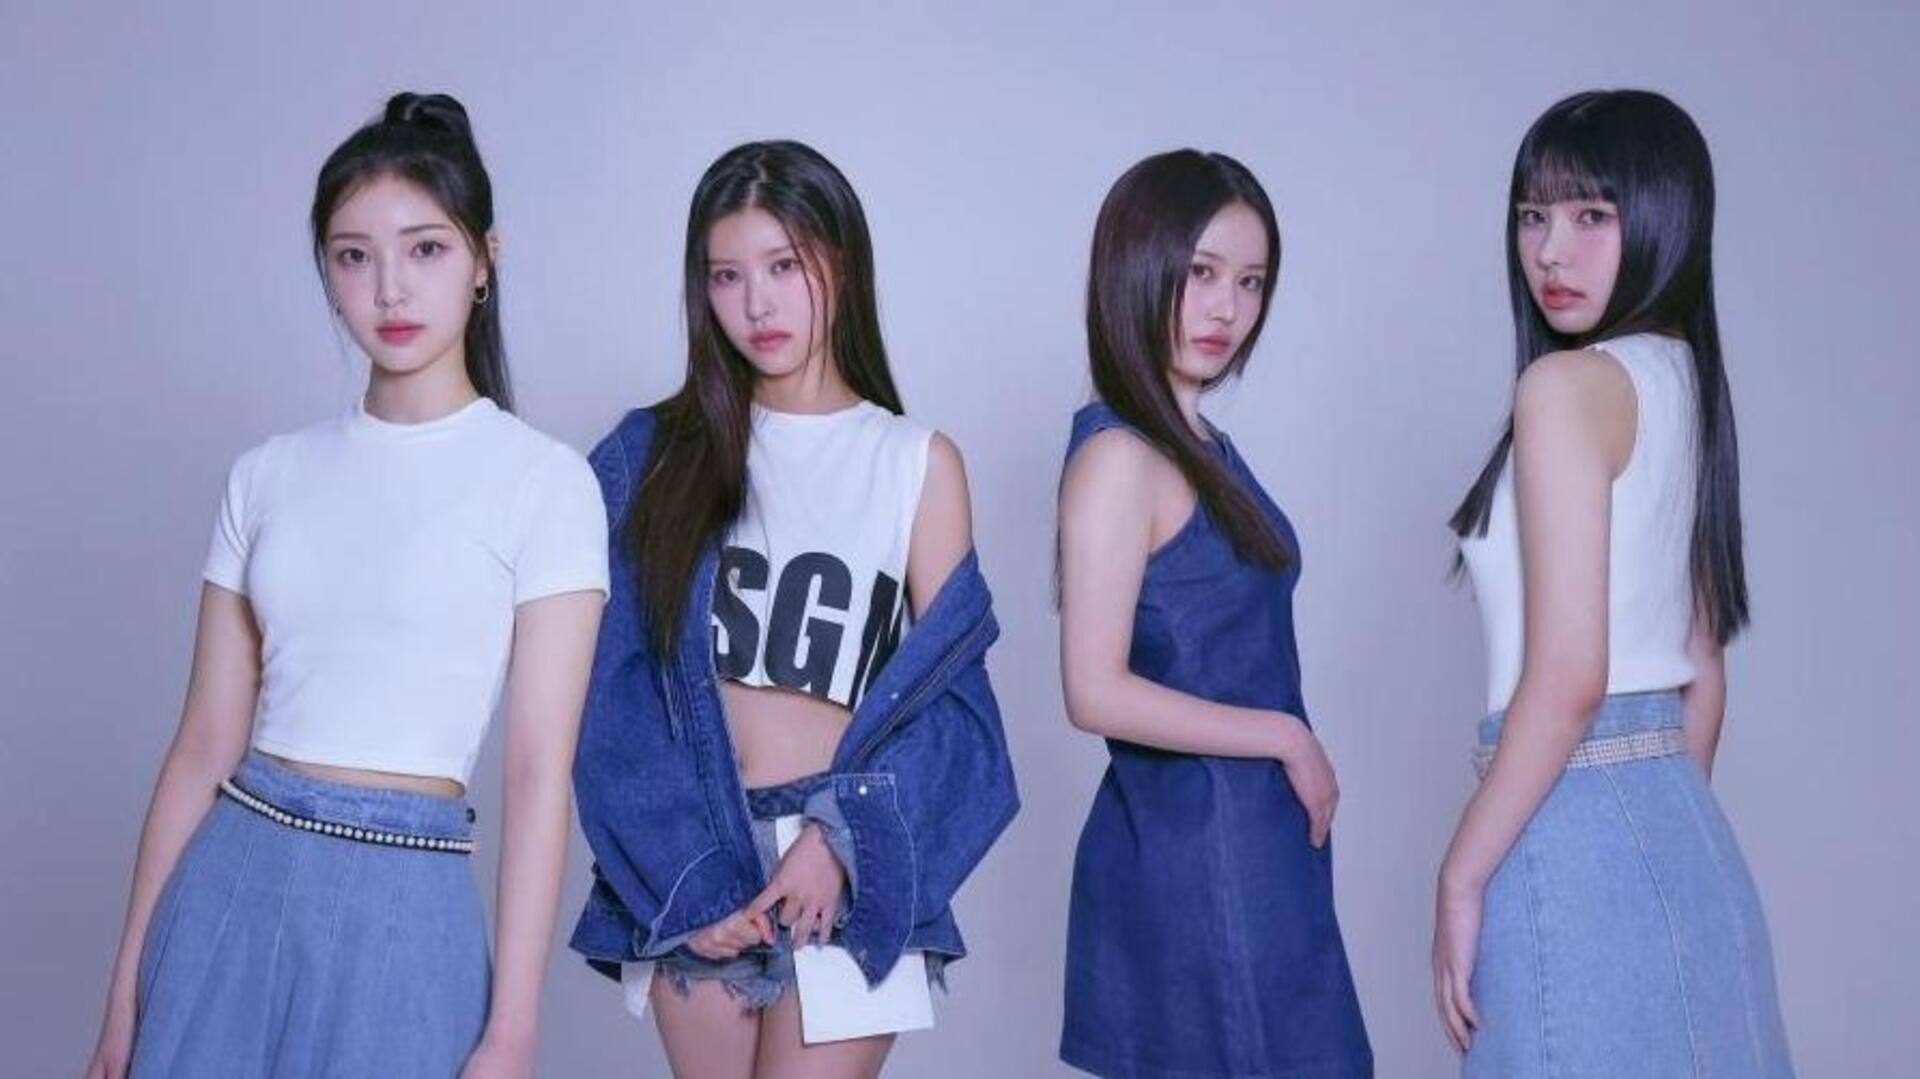 K-pop: Brave Entertainment's Candy Shop to debut in March